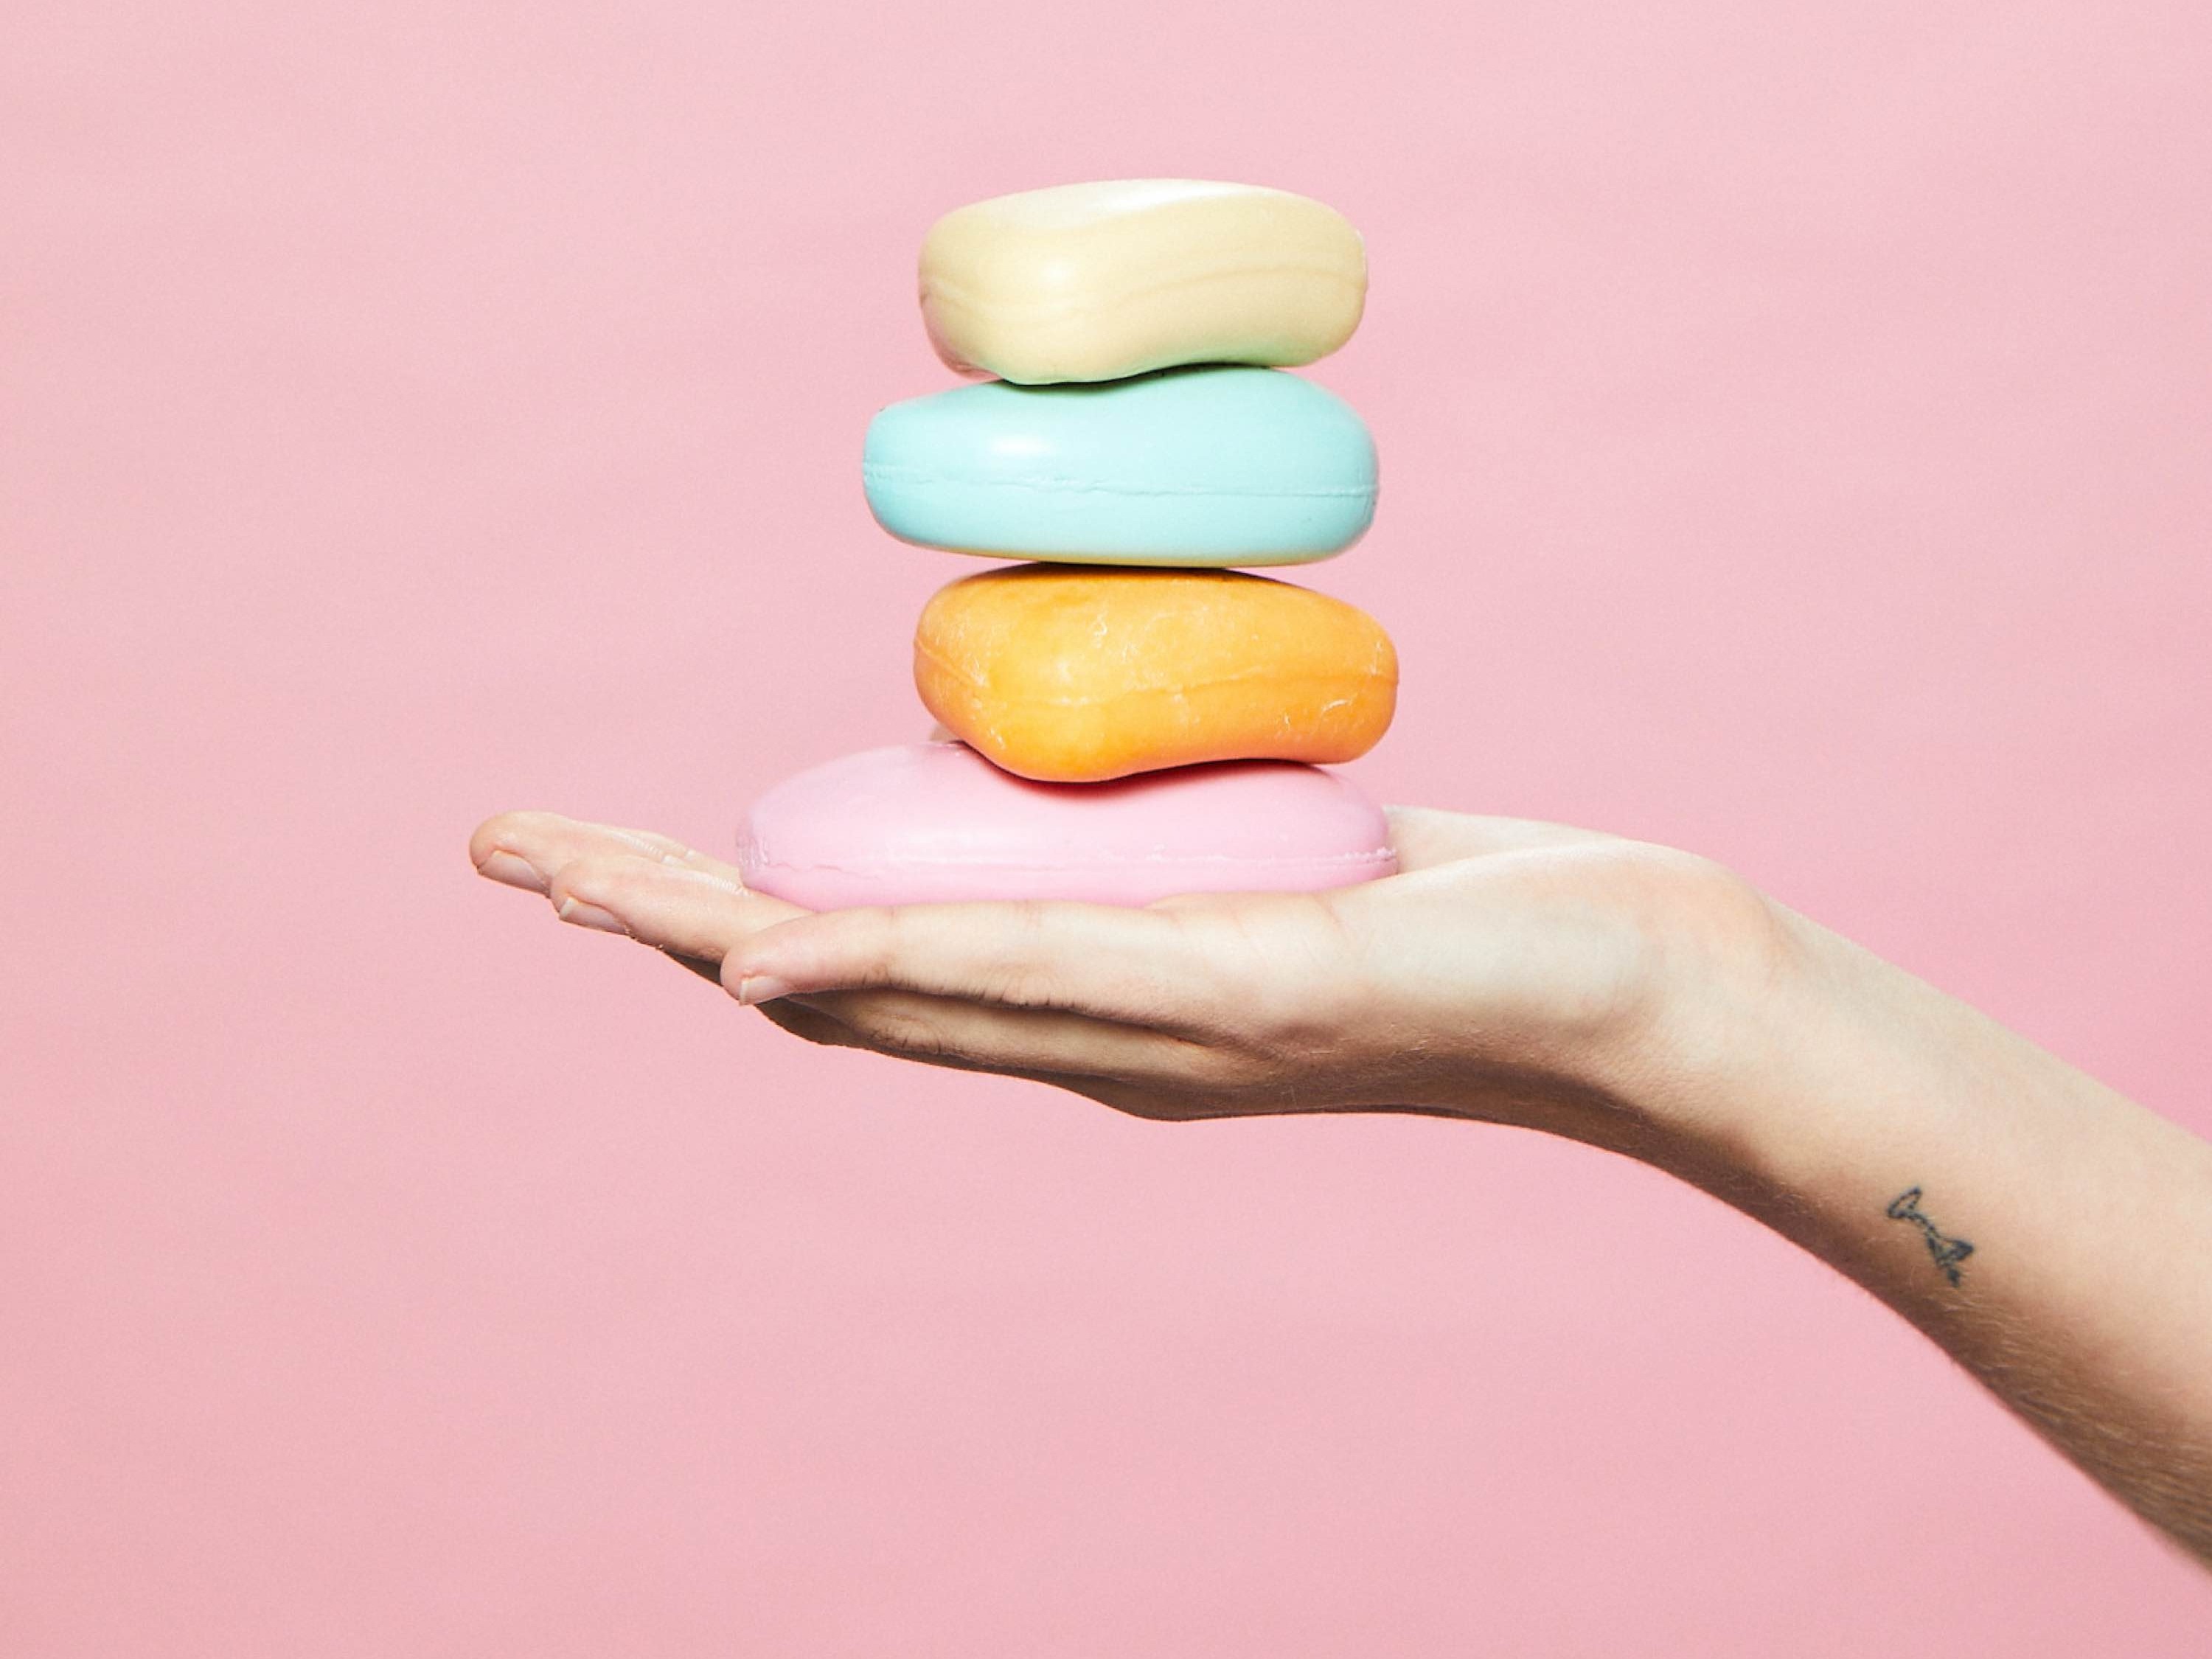 Image of hand holding stack of Peach soaps